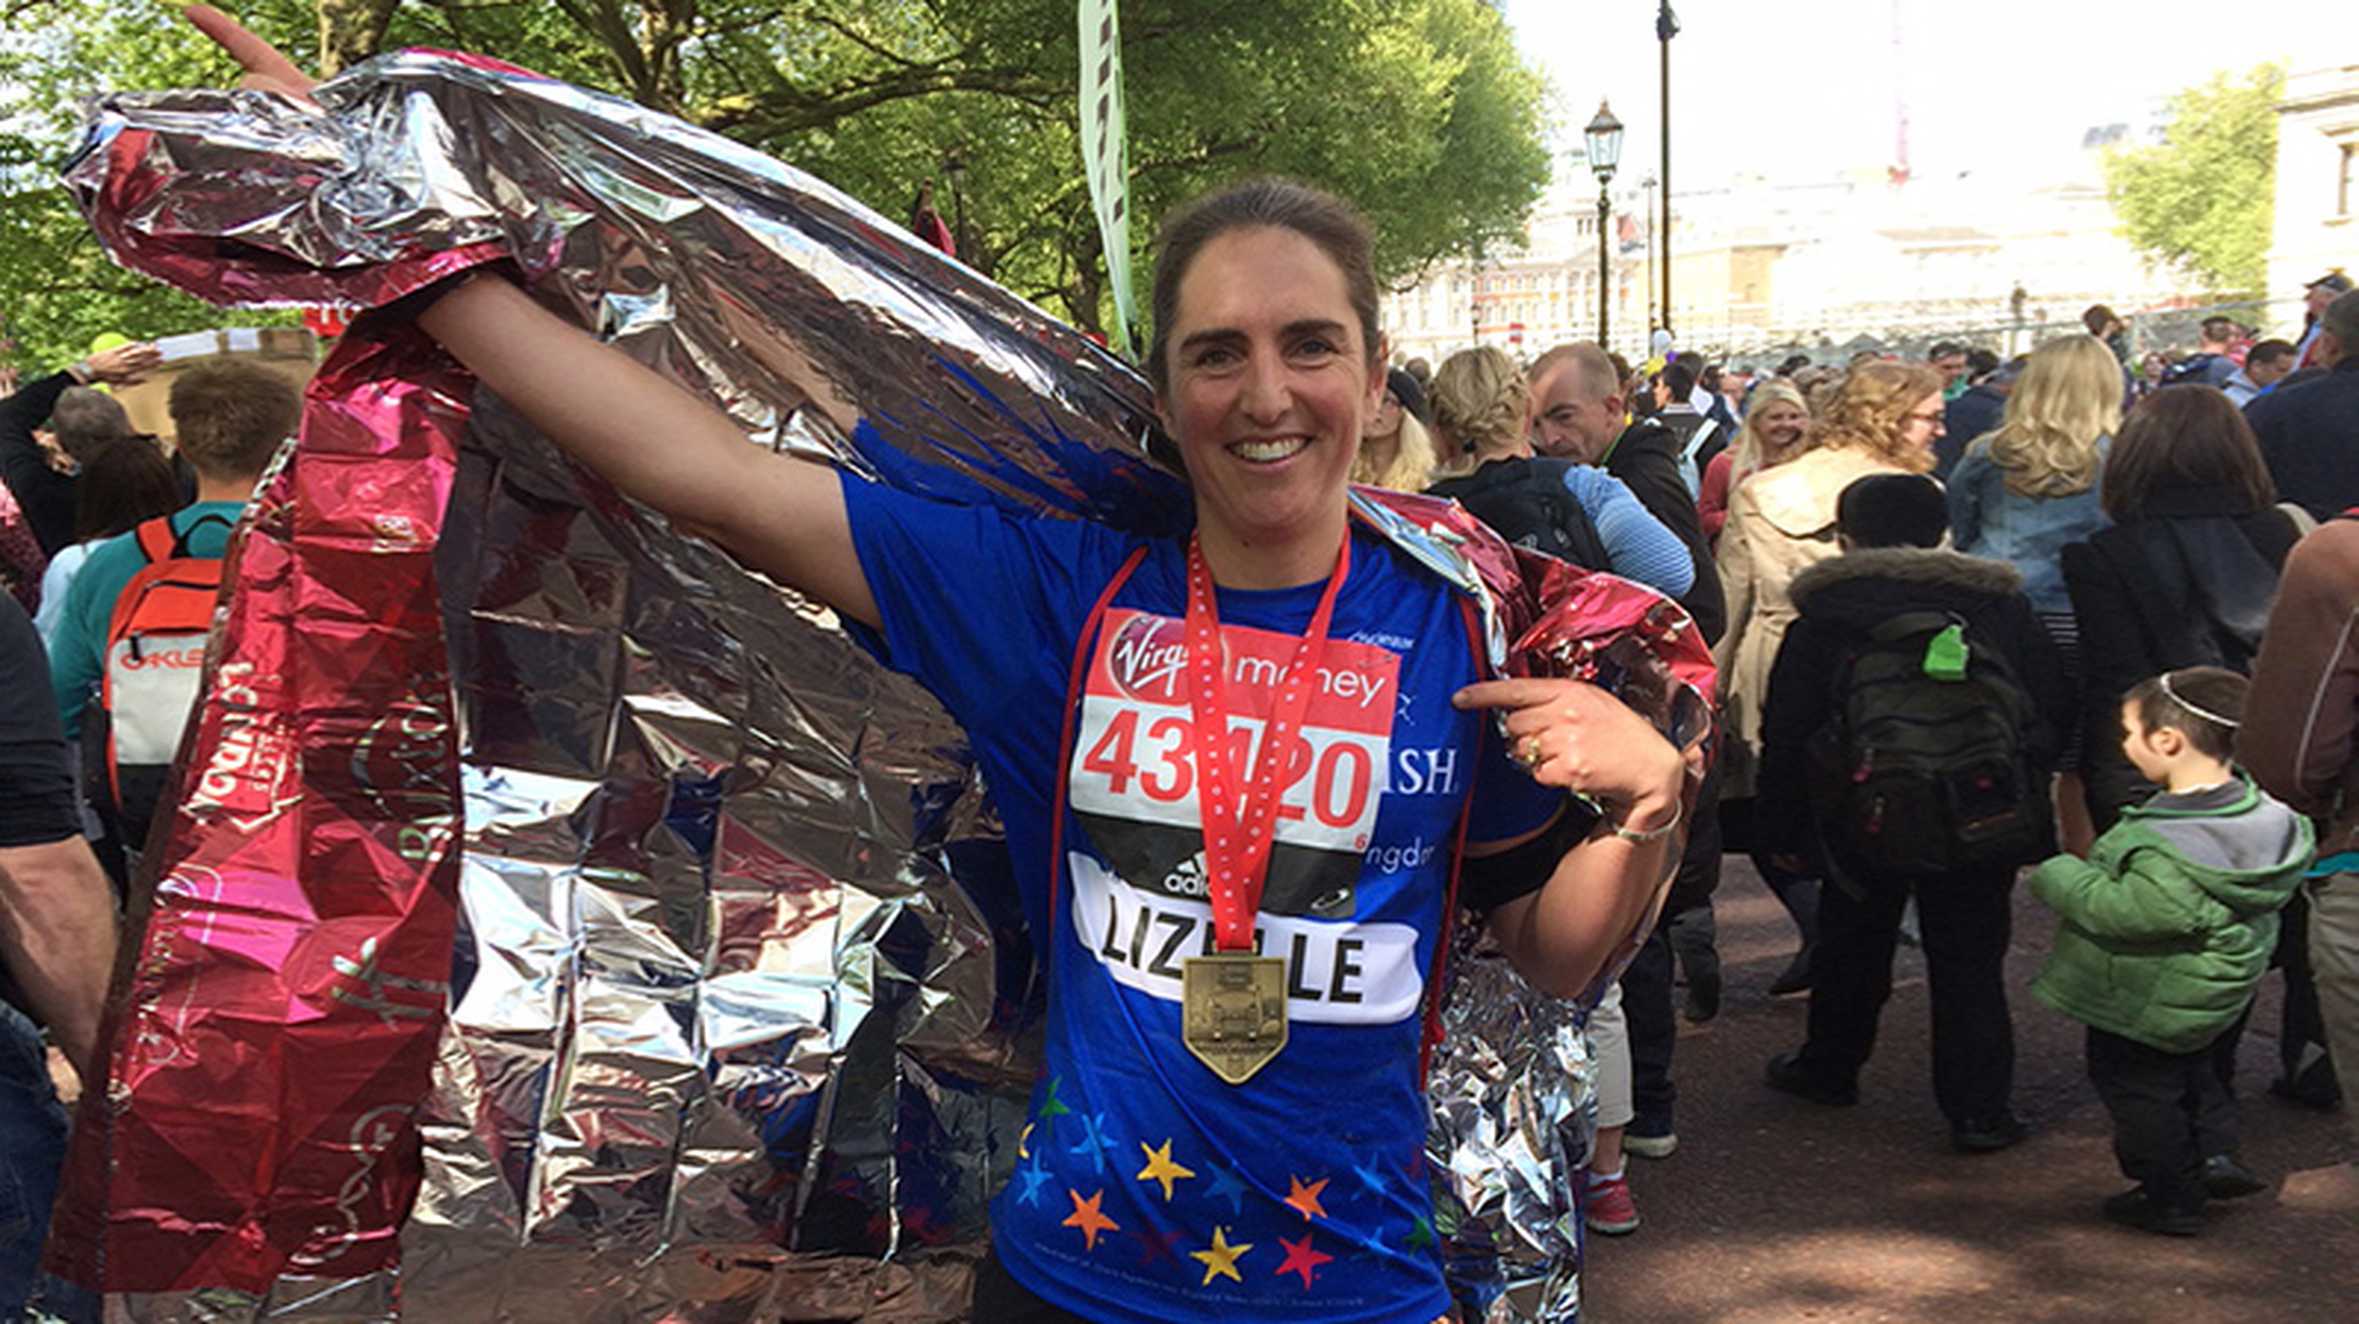 Lizelle wearing her medal and holding a celebratory hand in the air after completing the London Marathon.